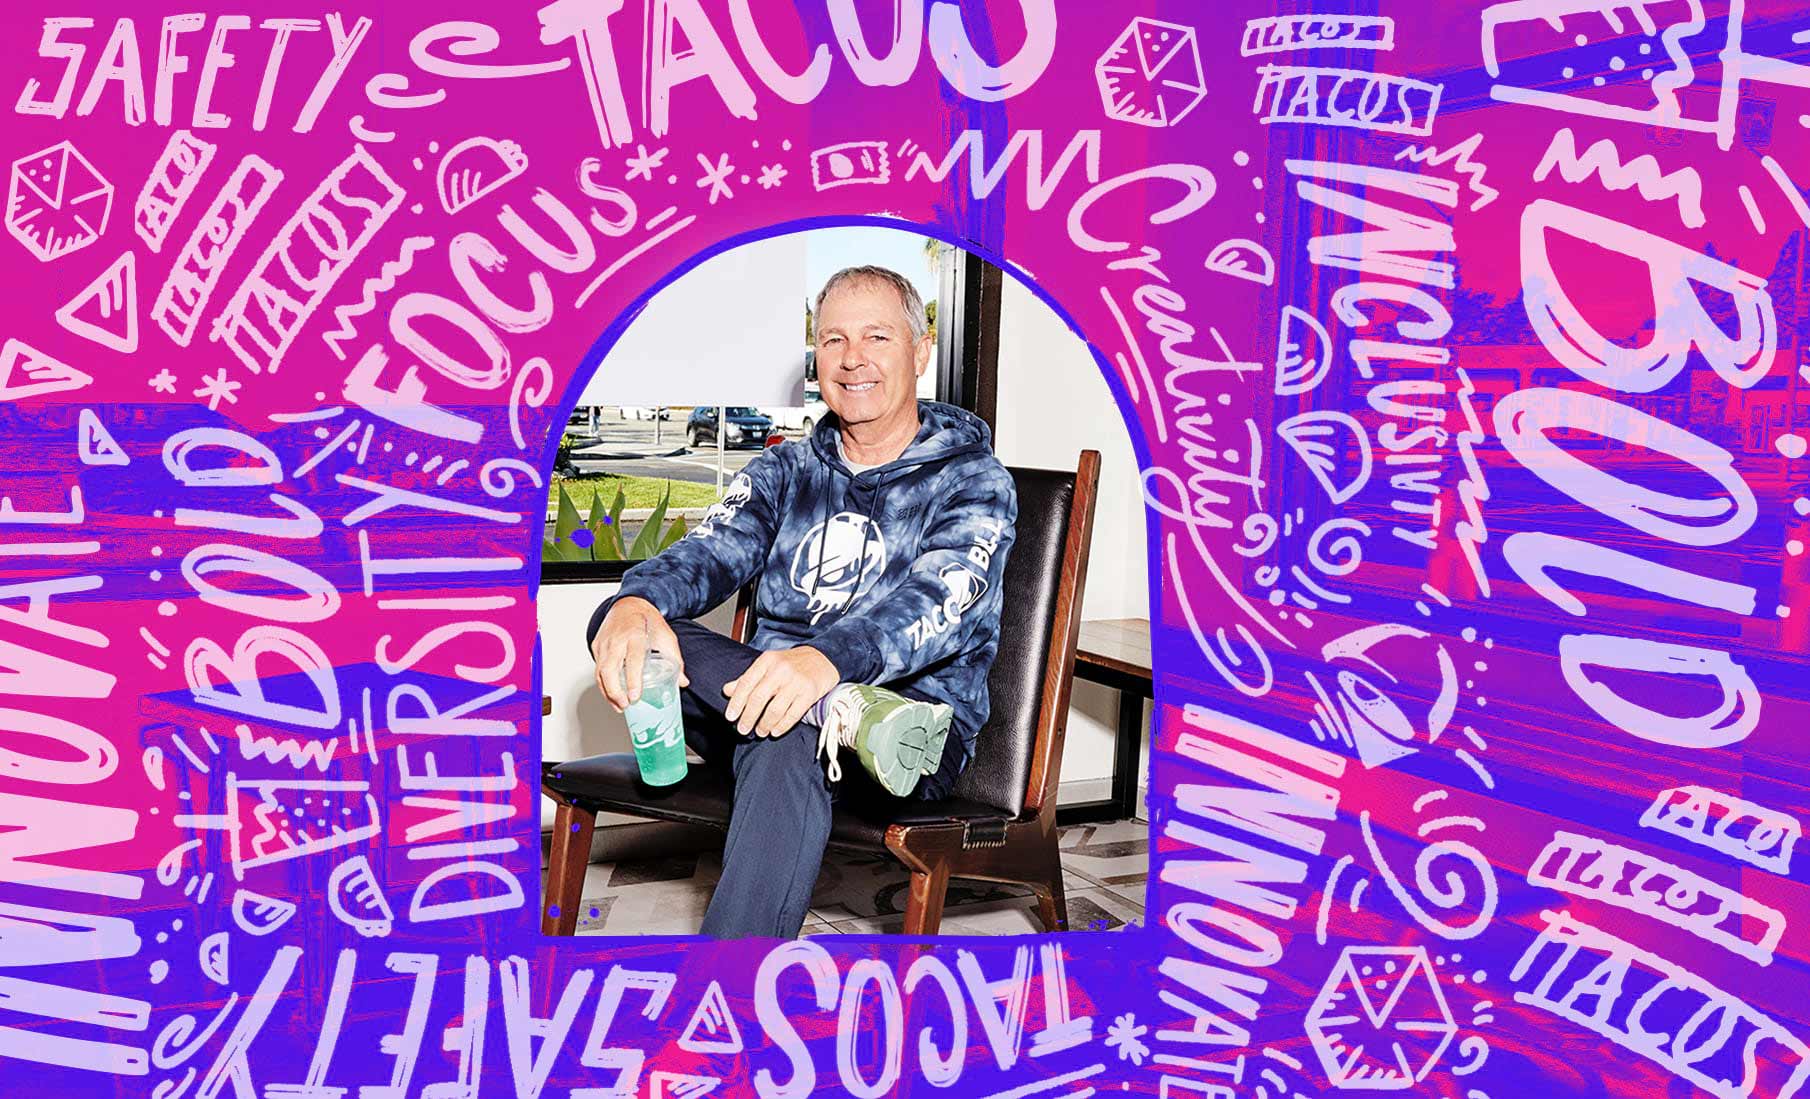 EP 12: Taco Bell’s 60th Anniversary, A Conversation with Global Chief Brand Officer, Sean Tresvant